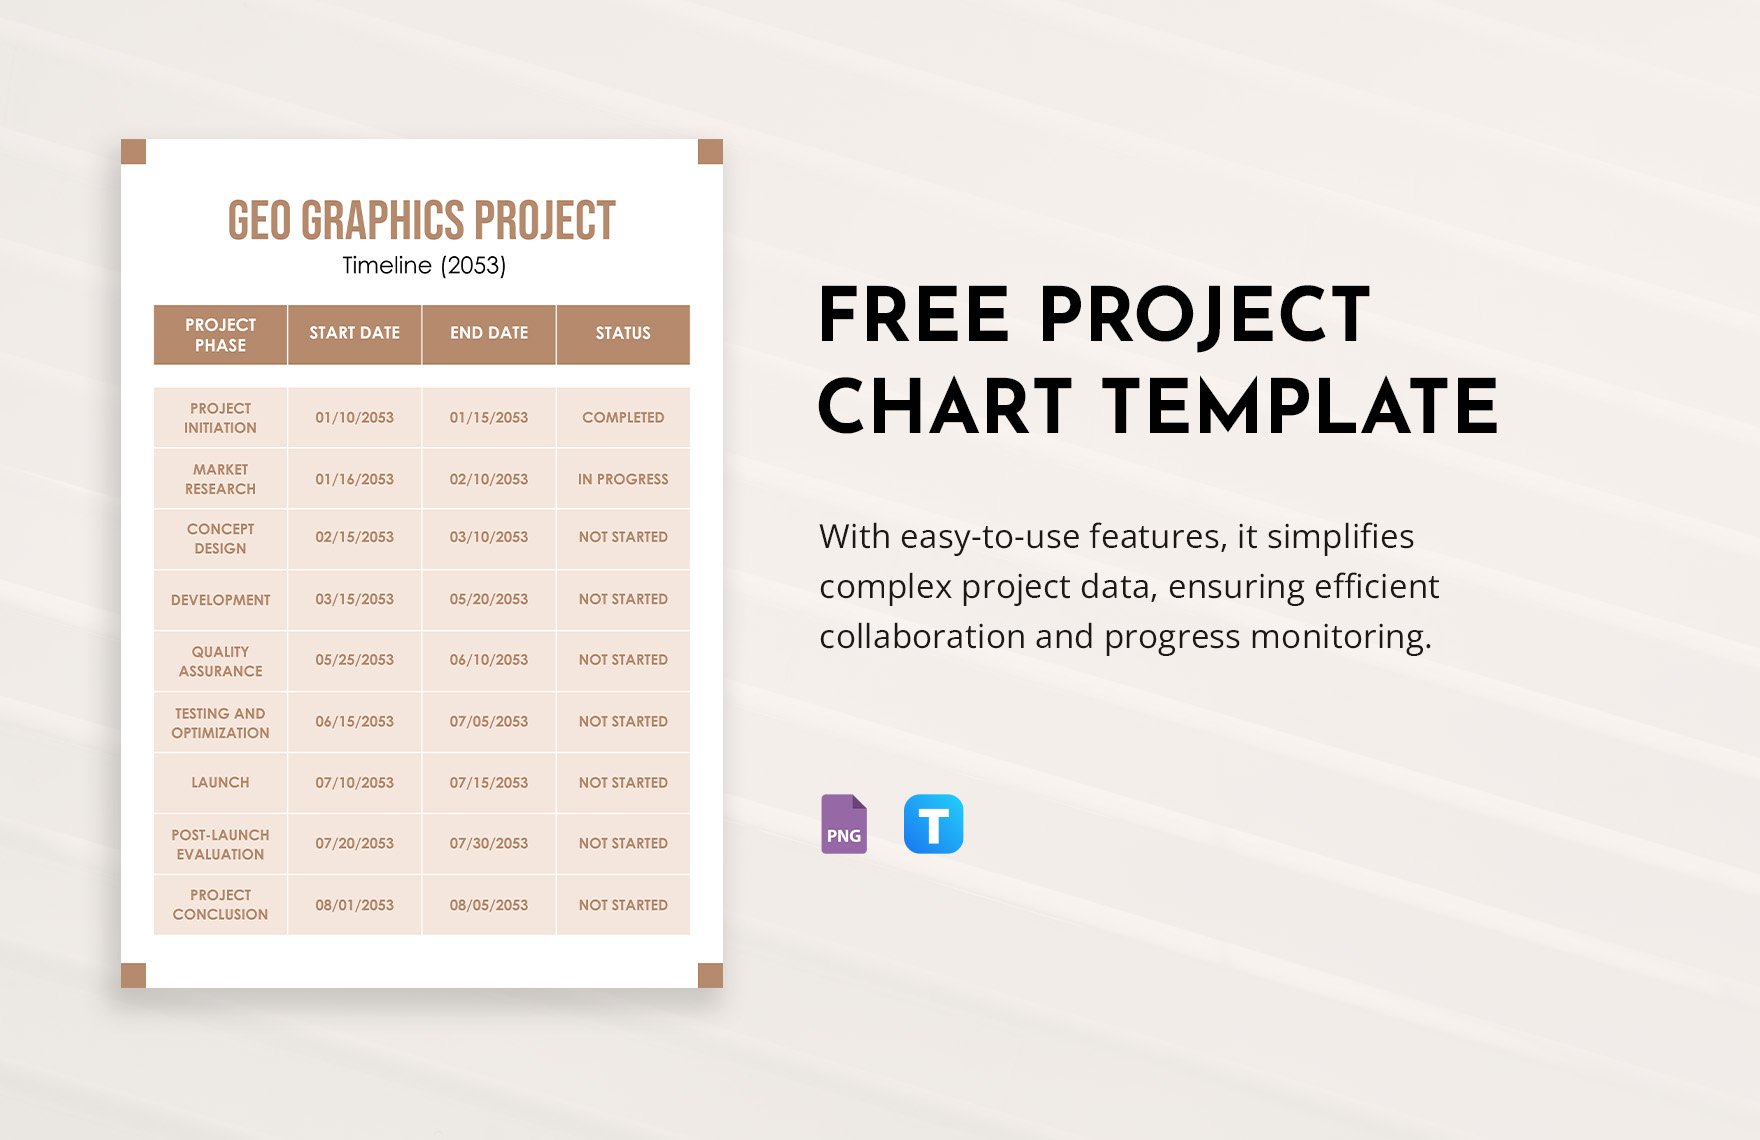 Project Chart Template